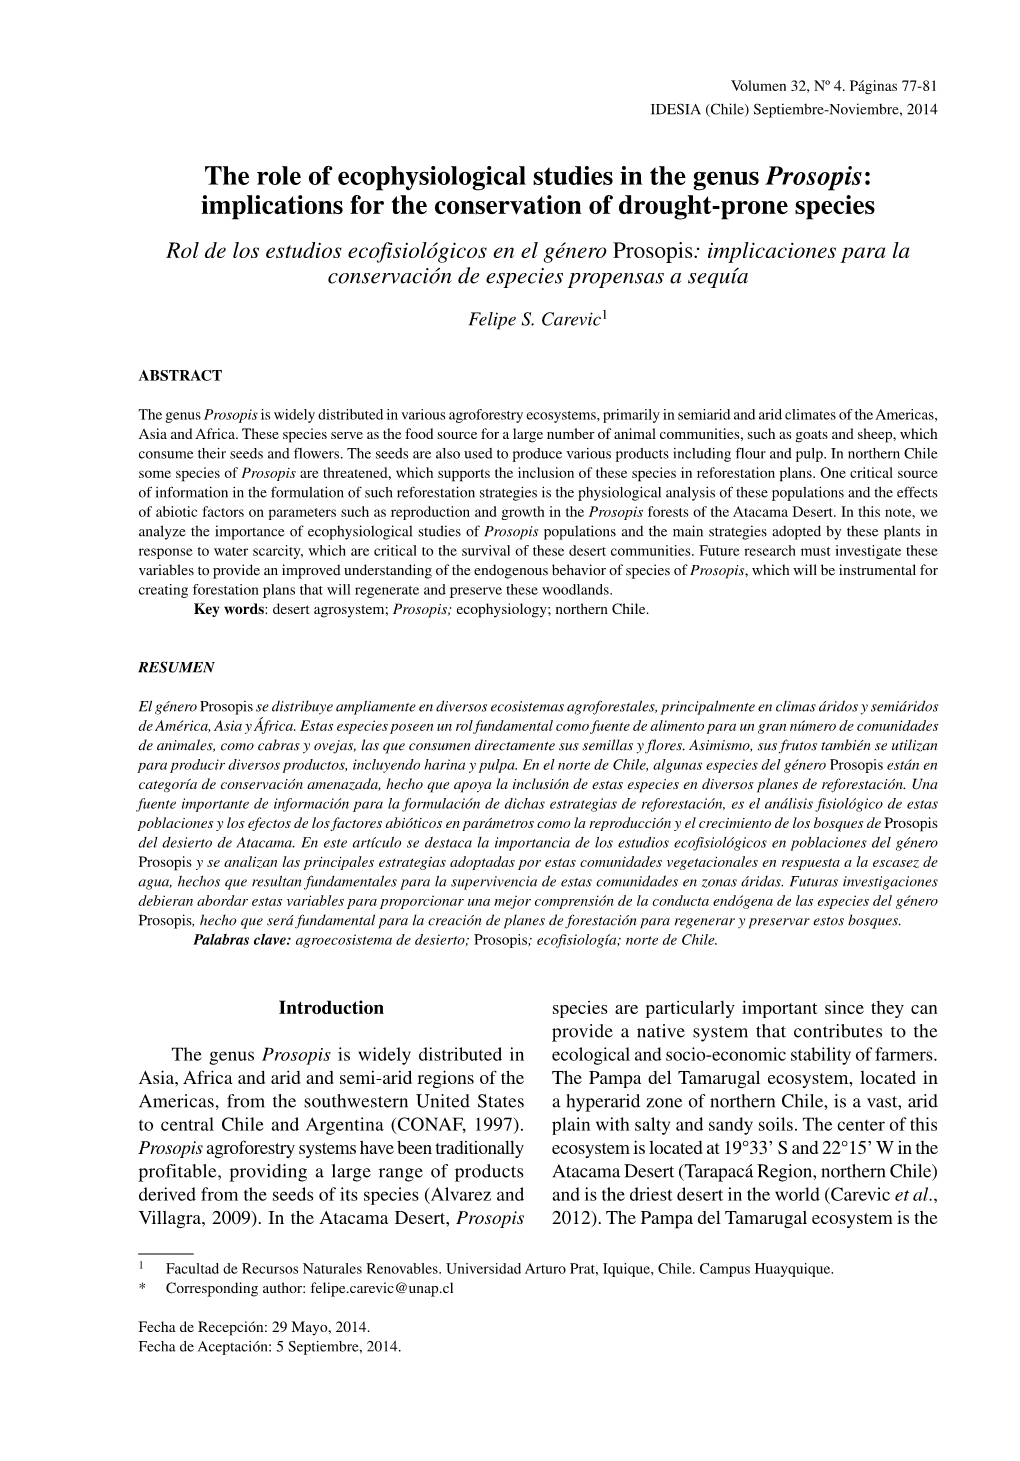 The Role of Ecophysiological Studies in the Genus Prosopis: Implications